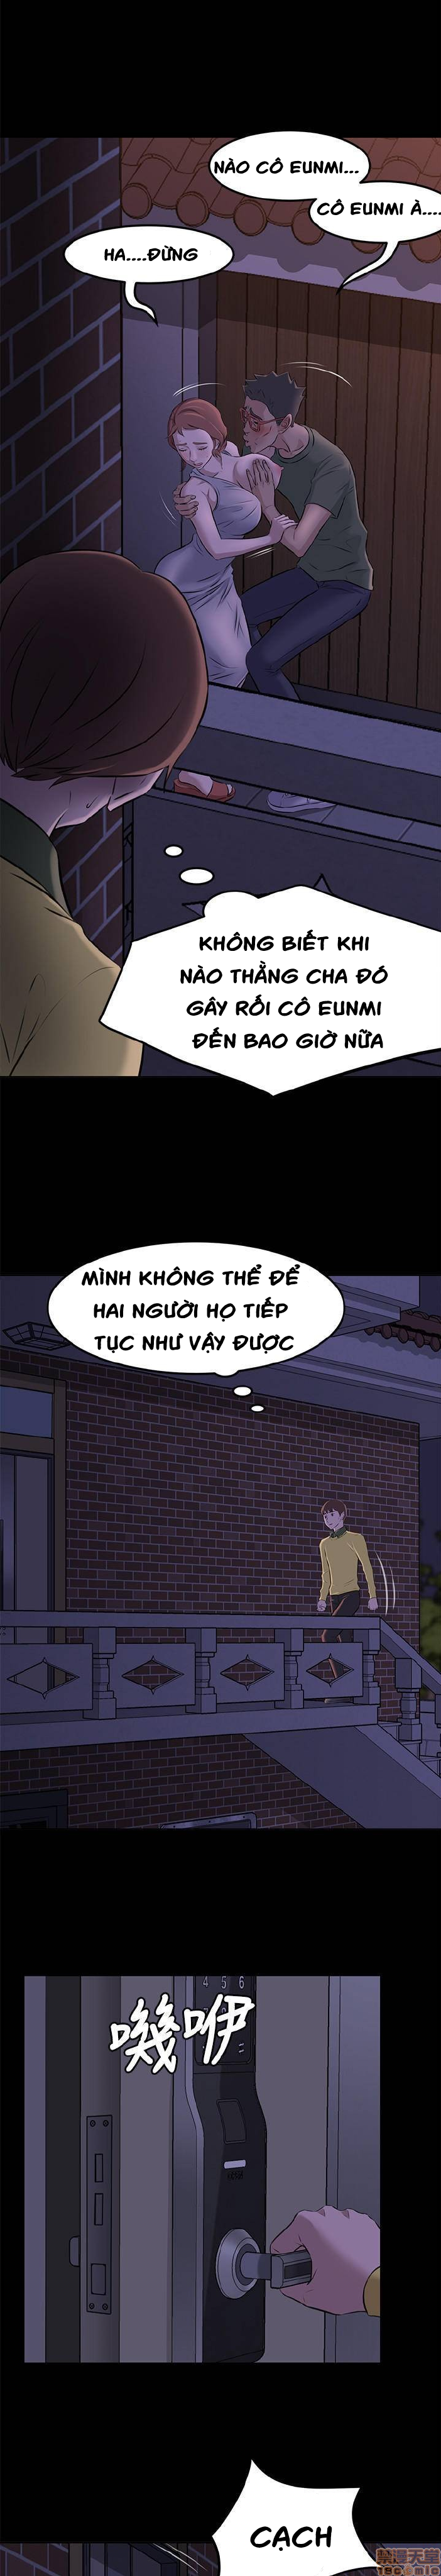 Chapter 002 : Chapter 02 ảnh 20